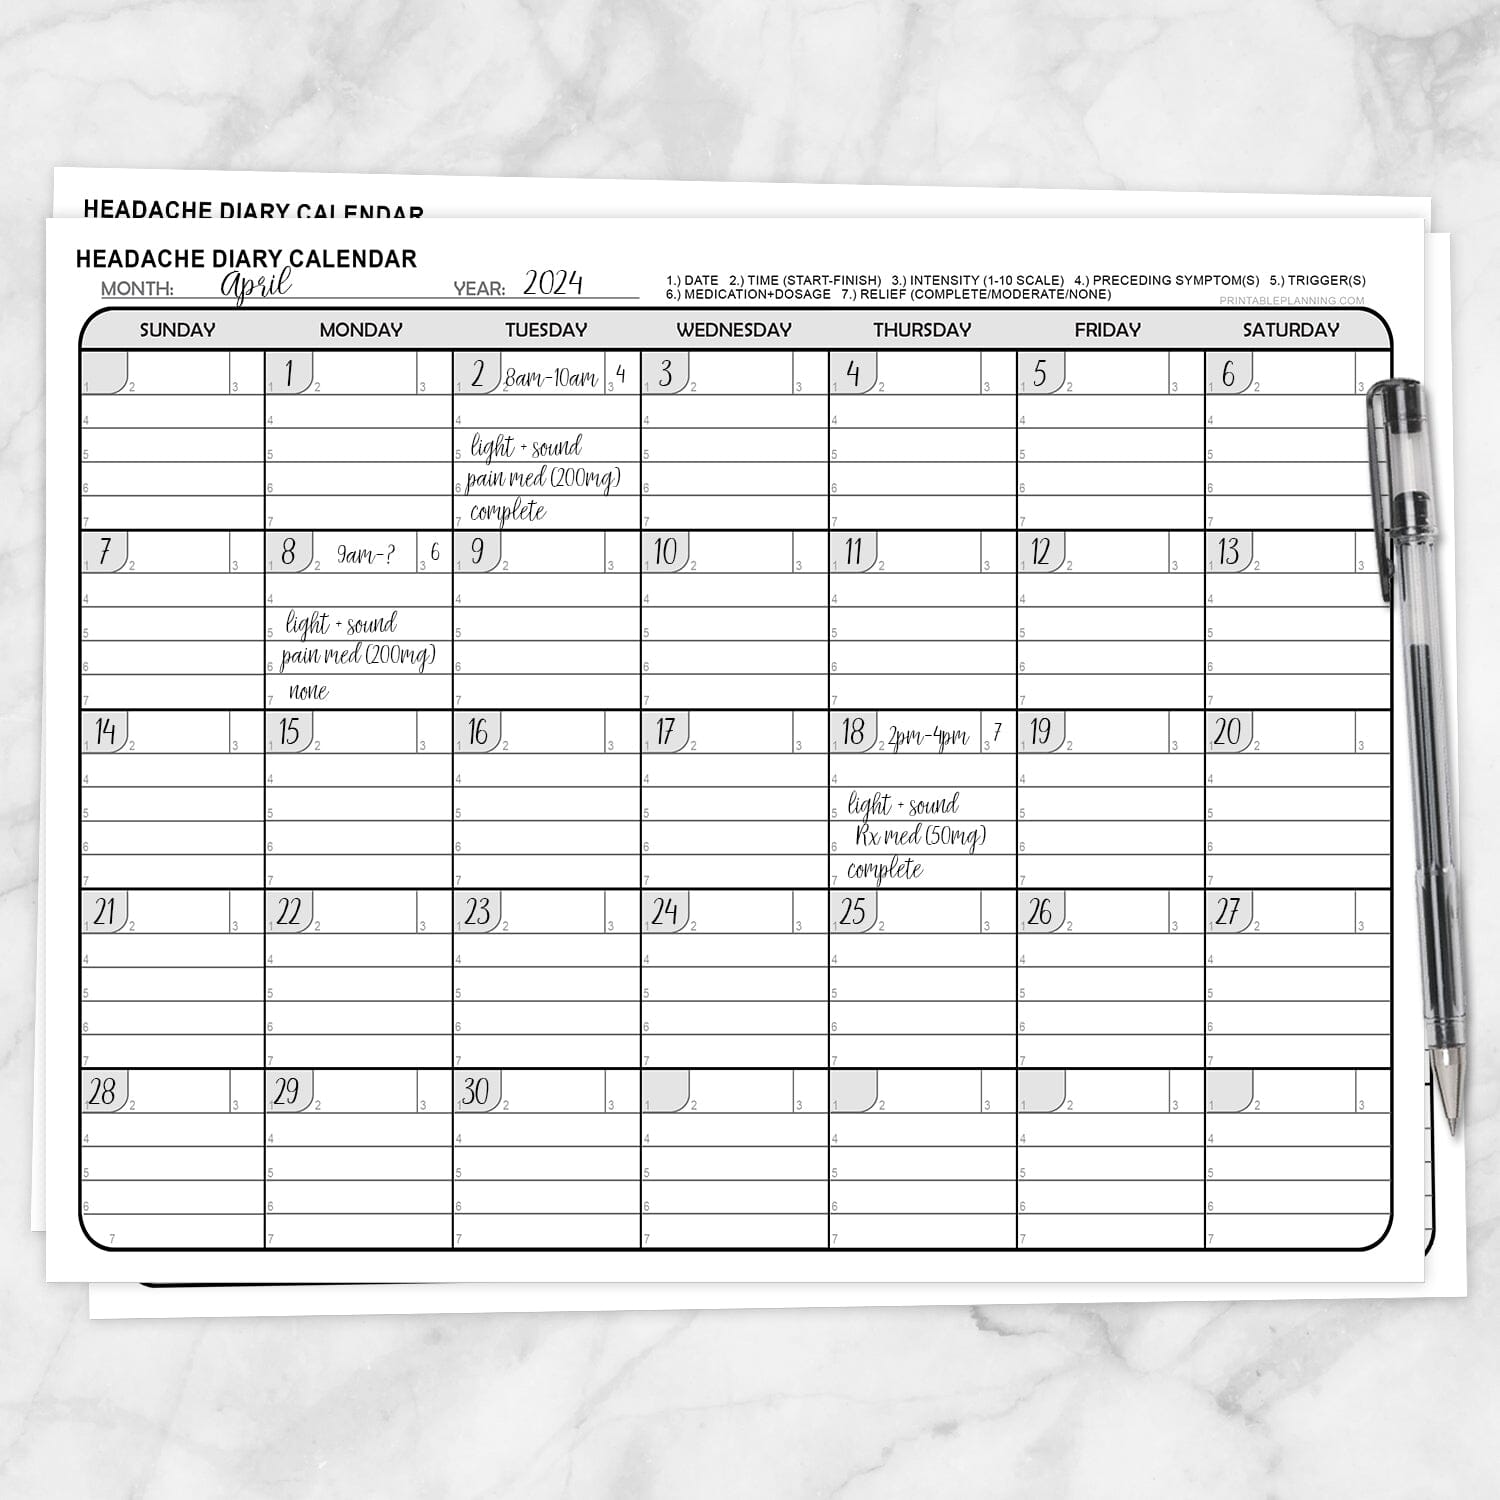 Printable Headache Diary Calendar (example with writing) at Printable Planning.